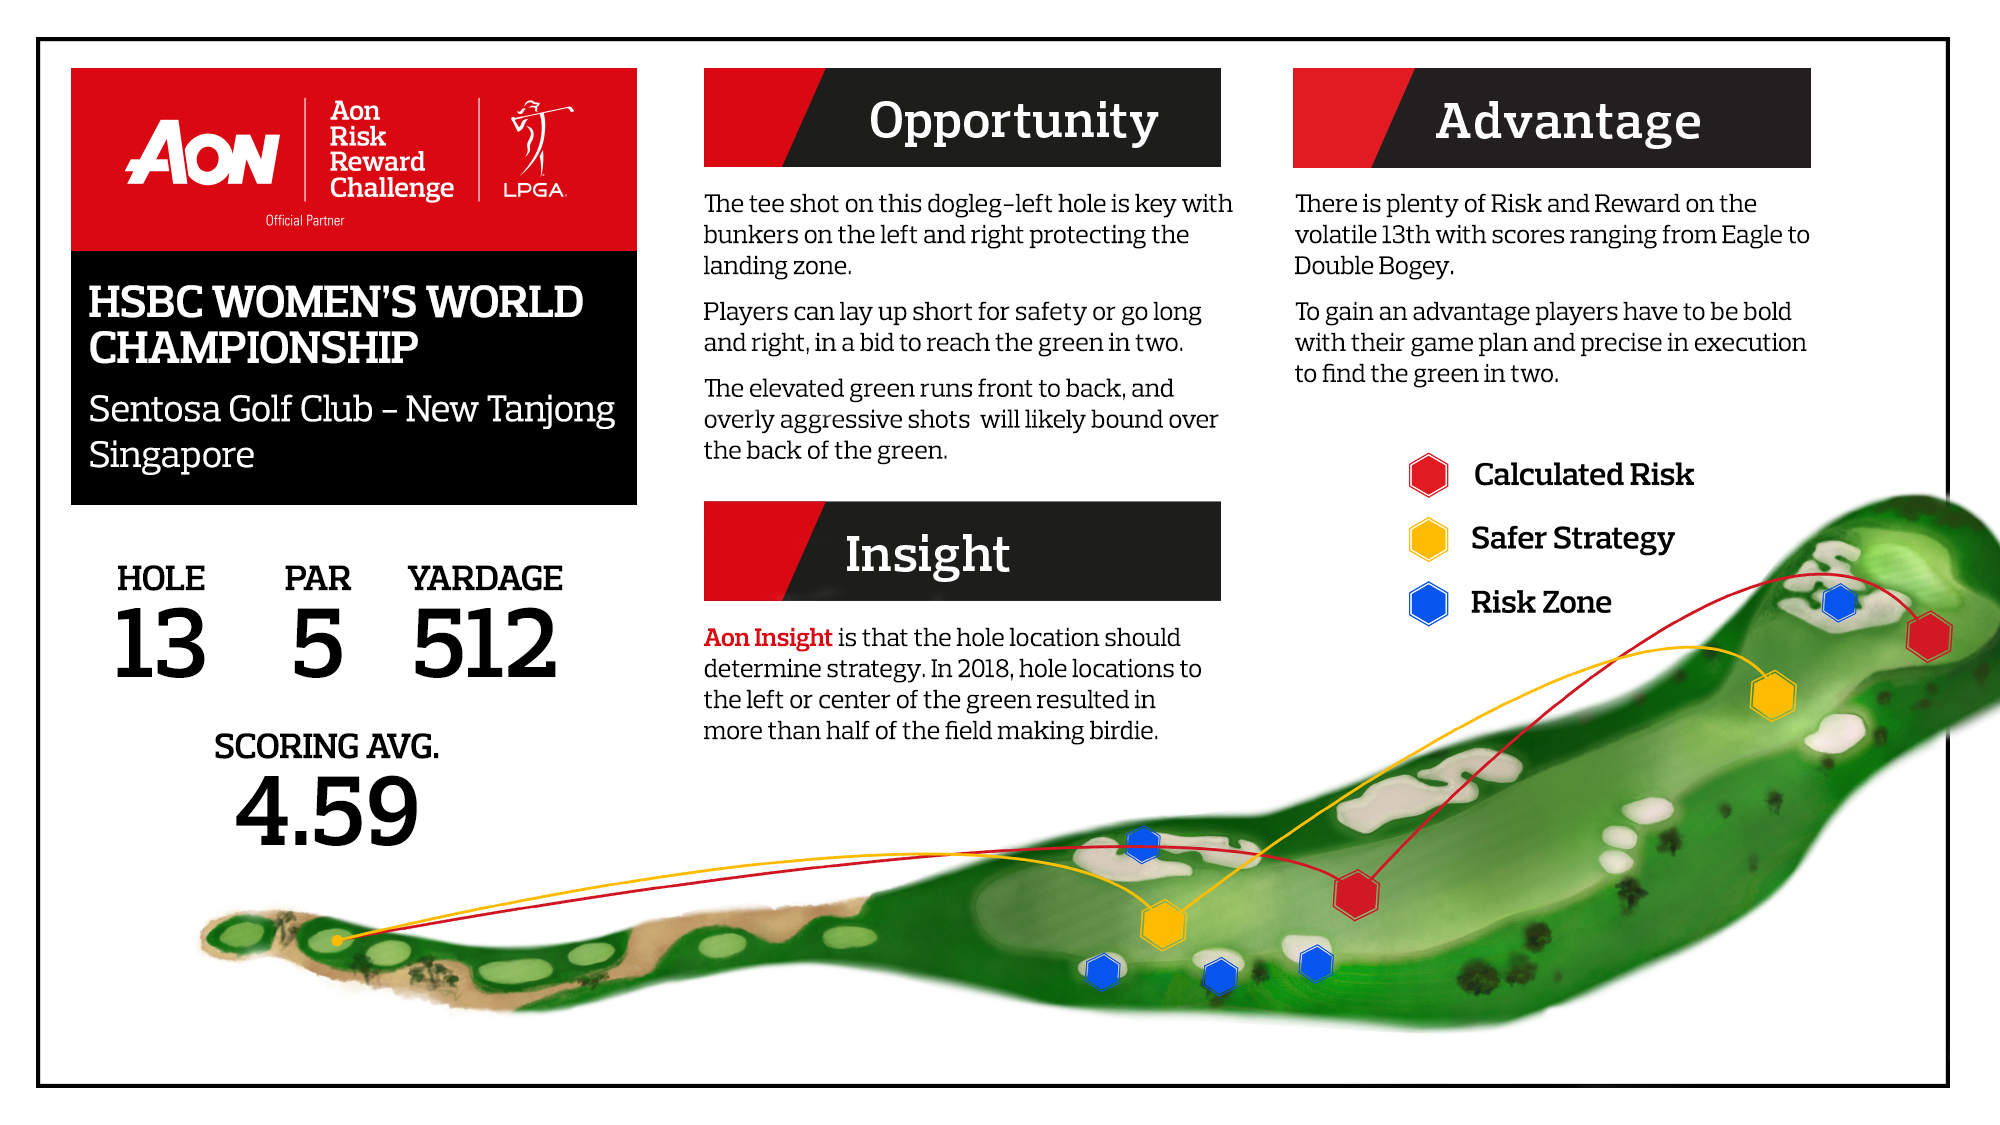 HSBC - This week focuses on the 13th hole at Sentosa Golf Club, a clear scoring opportunity that forces players to choose a strategy from the tee.